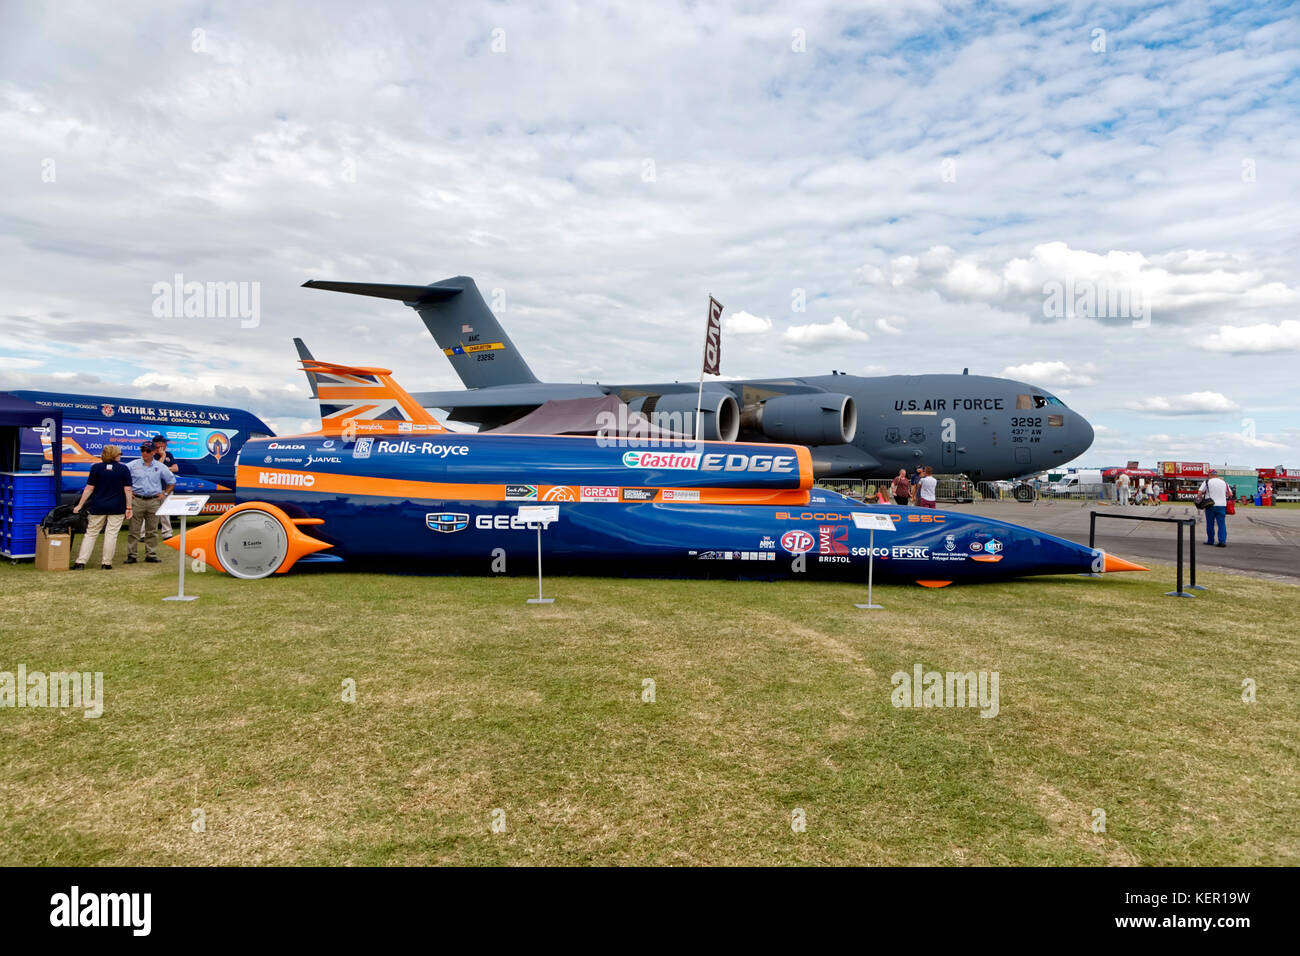 The Bloodhound SSC British supersonic land vehicle at the RNAS Yeovilton International Air Day 2017 Stock Photo